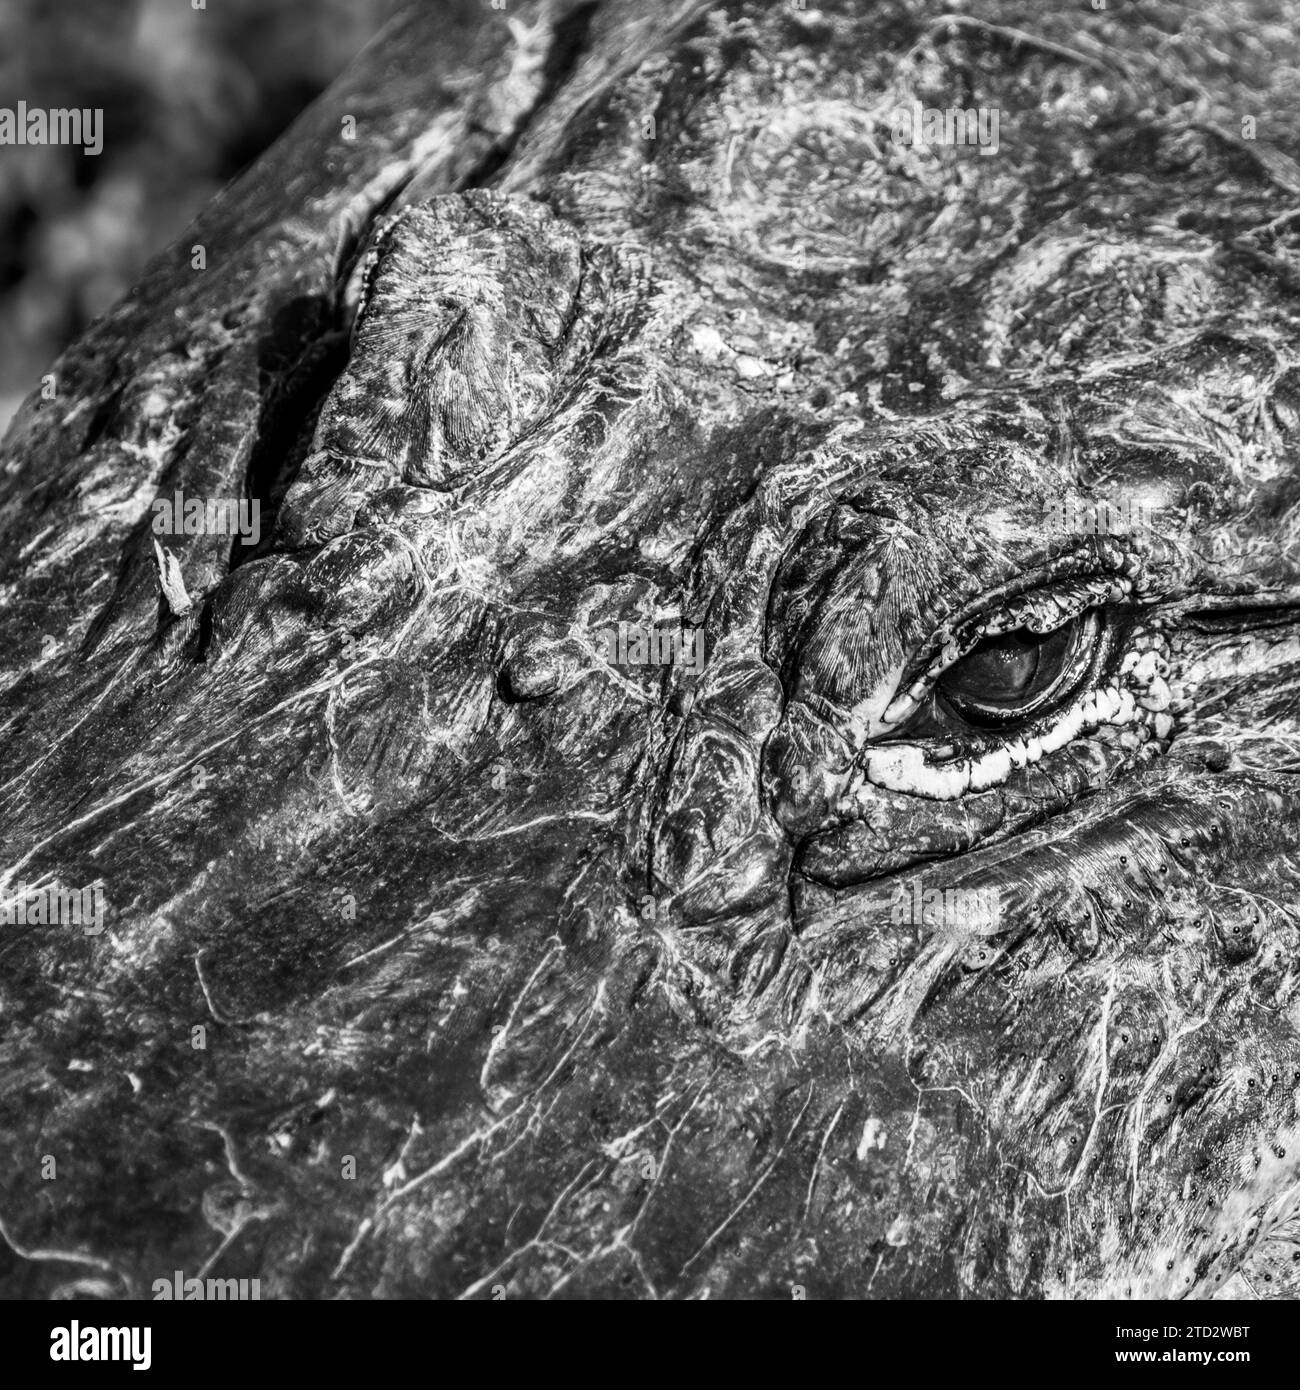 Top Of Alligator Head Contrast Black And White in Everglades Stock Photo